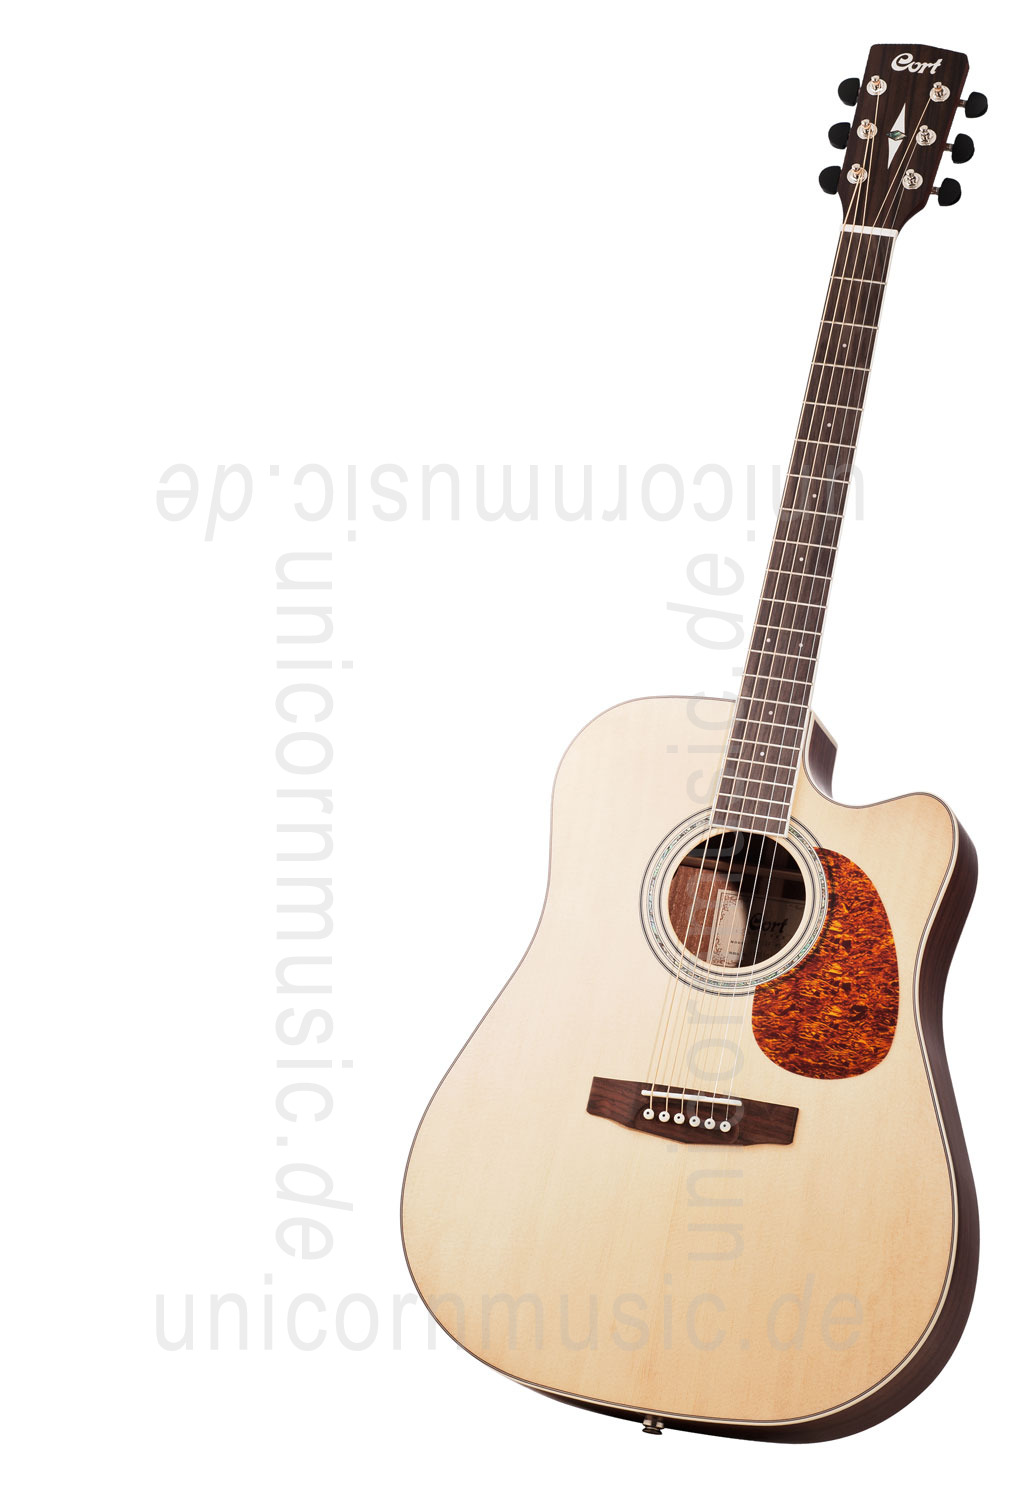 to article description / price Acoustic Guitar CORT MR 710-F NS - Dreadnought - Fishman - Cutaway - solid spruce top